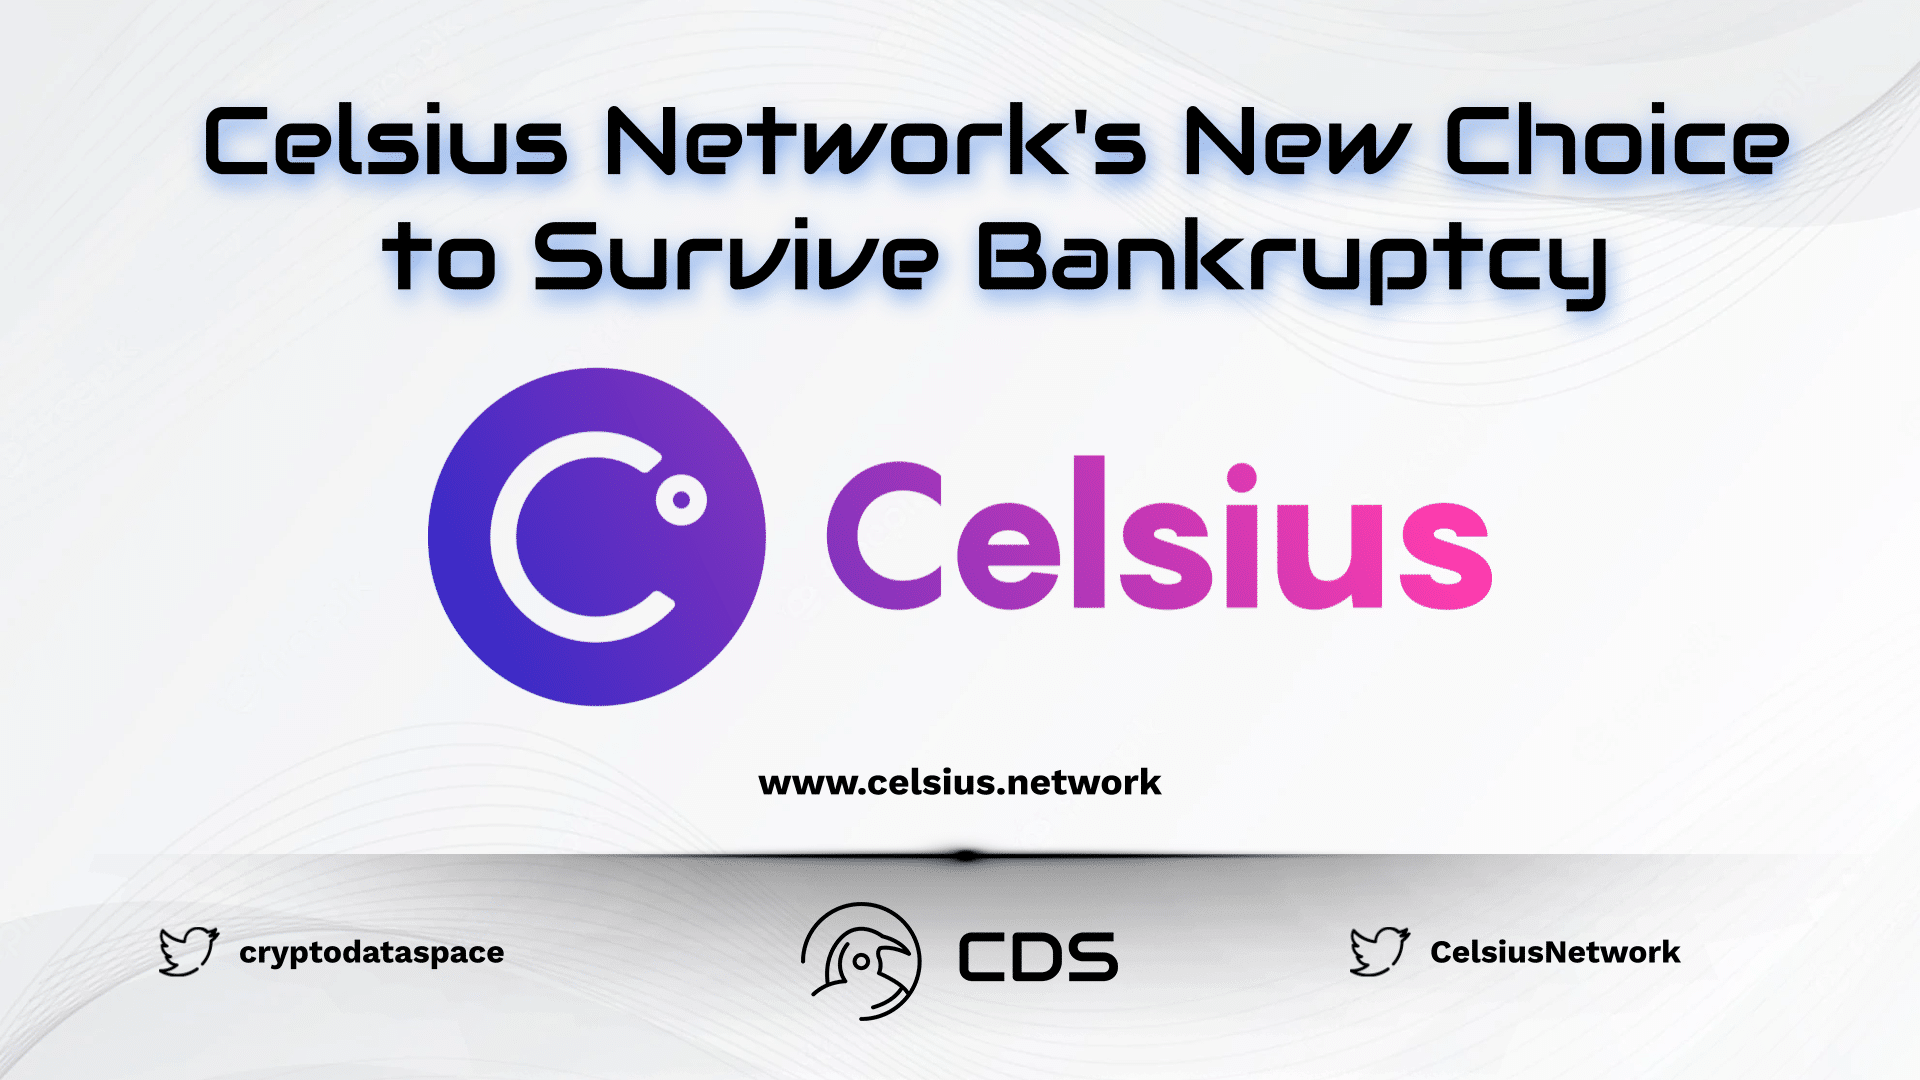 Celsius Network's New Choice to Survive Bankruptcy